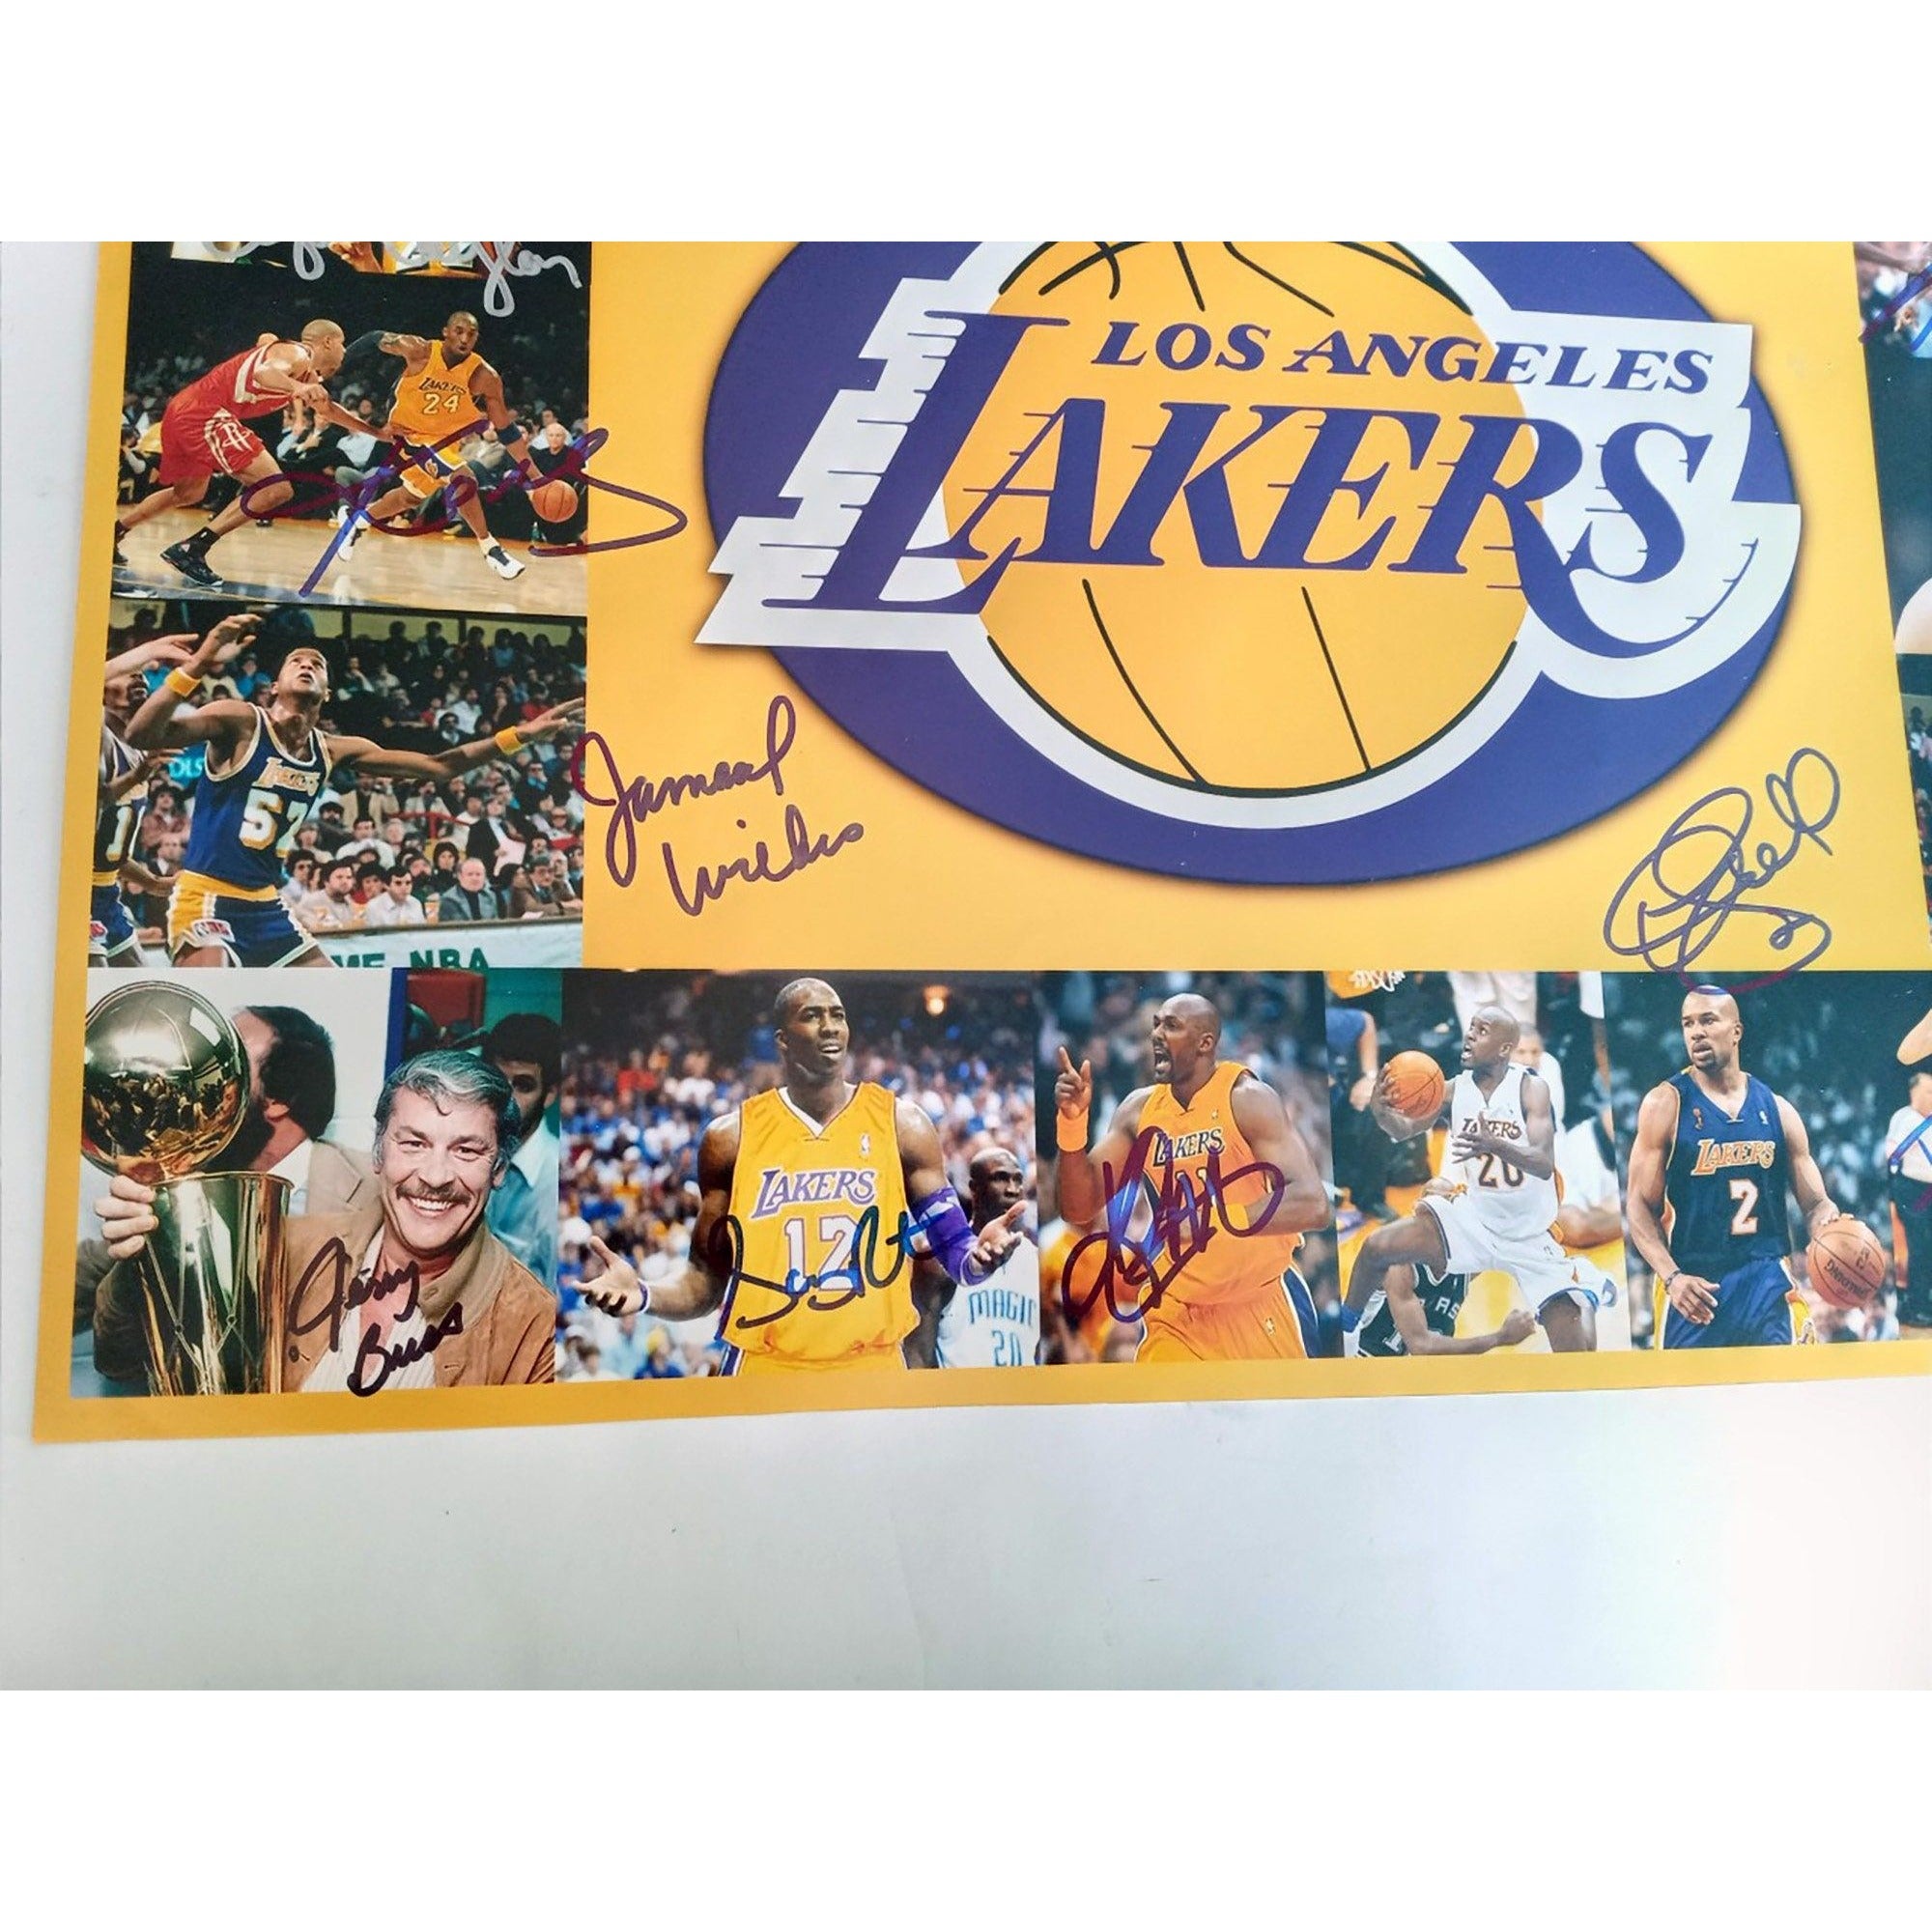 Awesome Artifacts Kobe Bryant, Shaquille O'Neal, Jerry Bus Jerry West 2019-20 Los Angeles Lakers Team Signed Shooting Shirt with Proof by Awesome Artifact